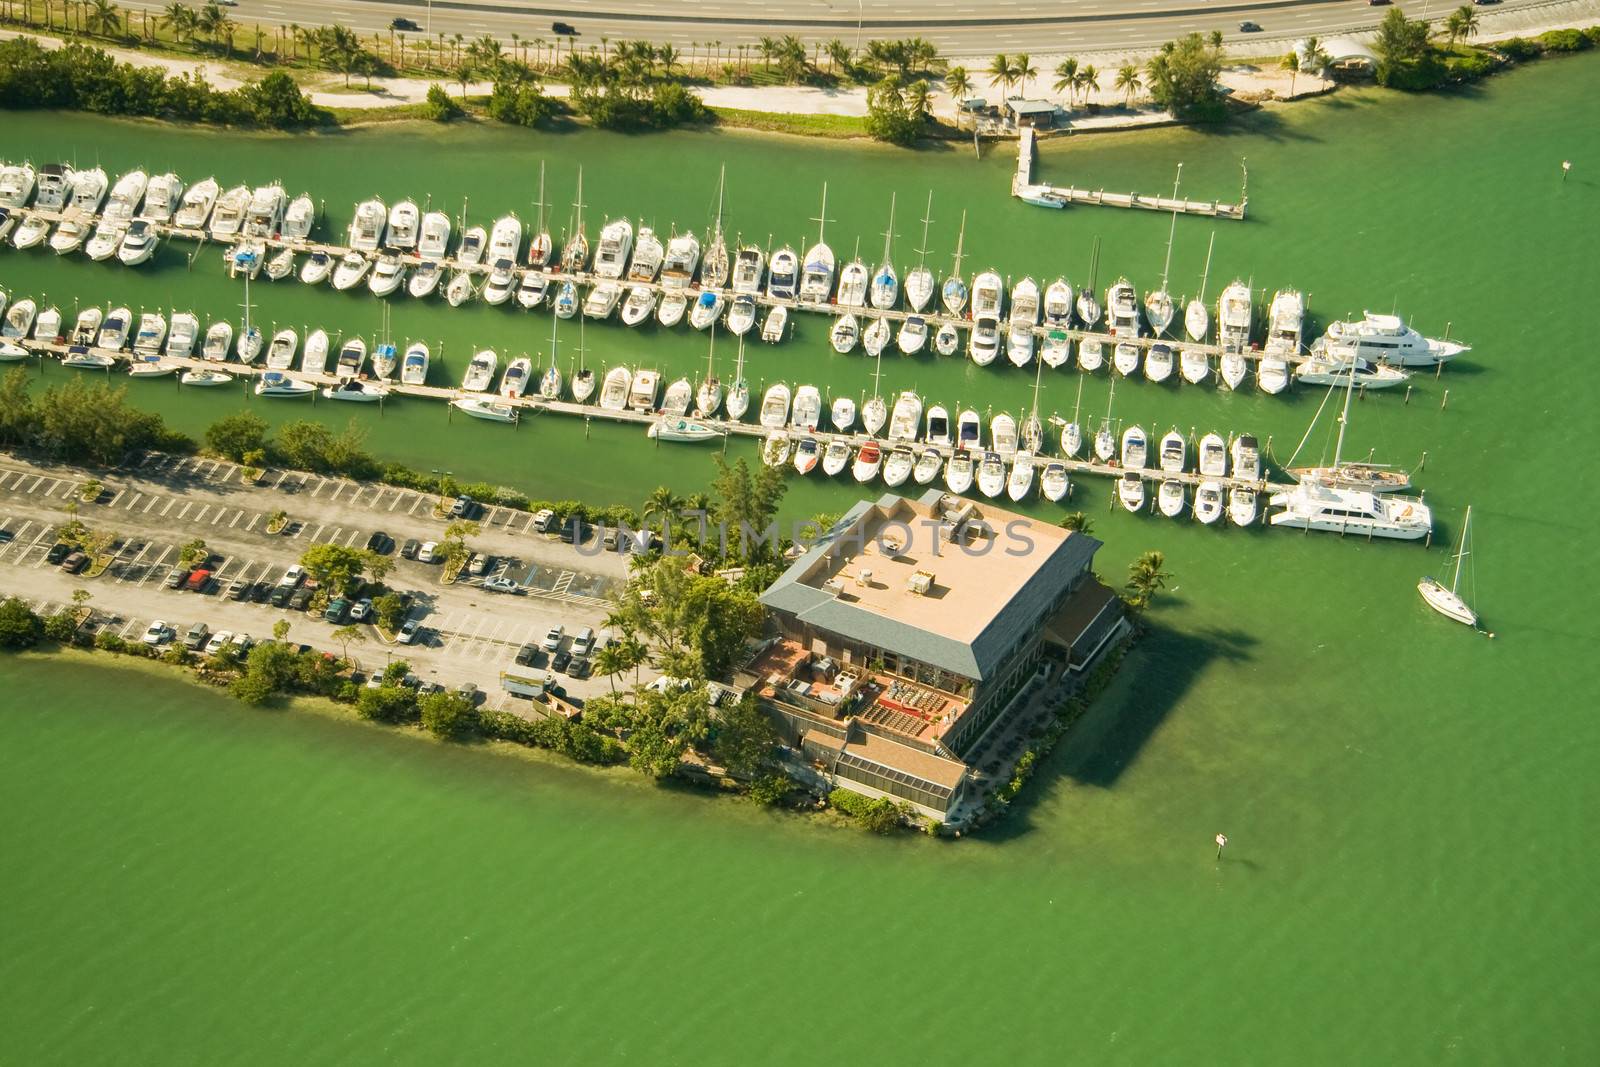 An aerial view of boats in a marina in Miami, Florida.